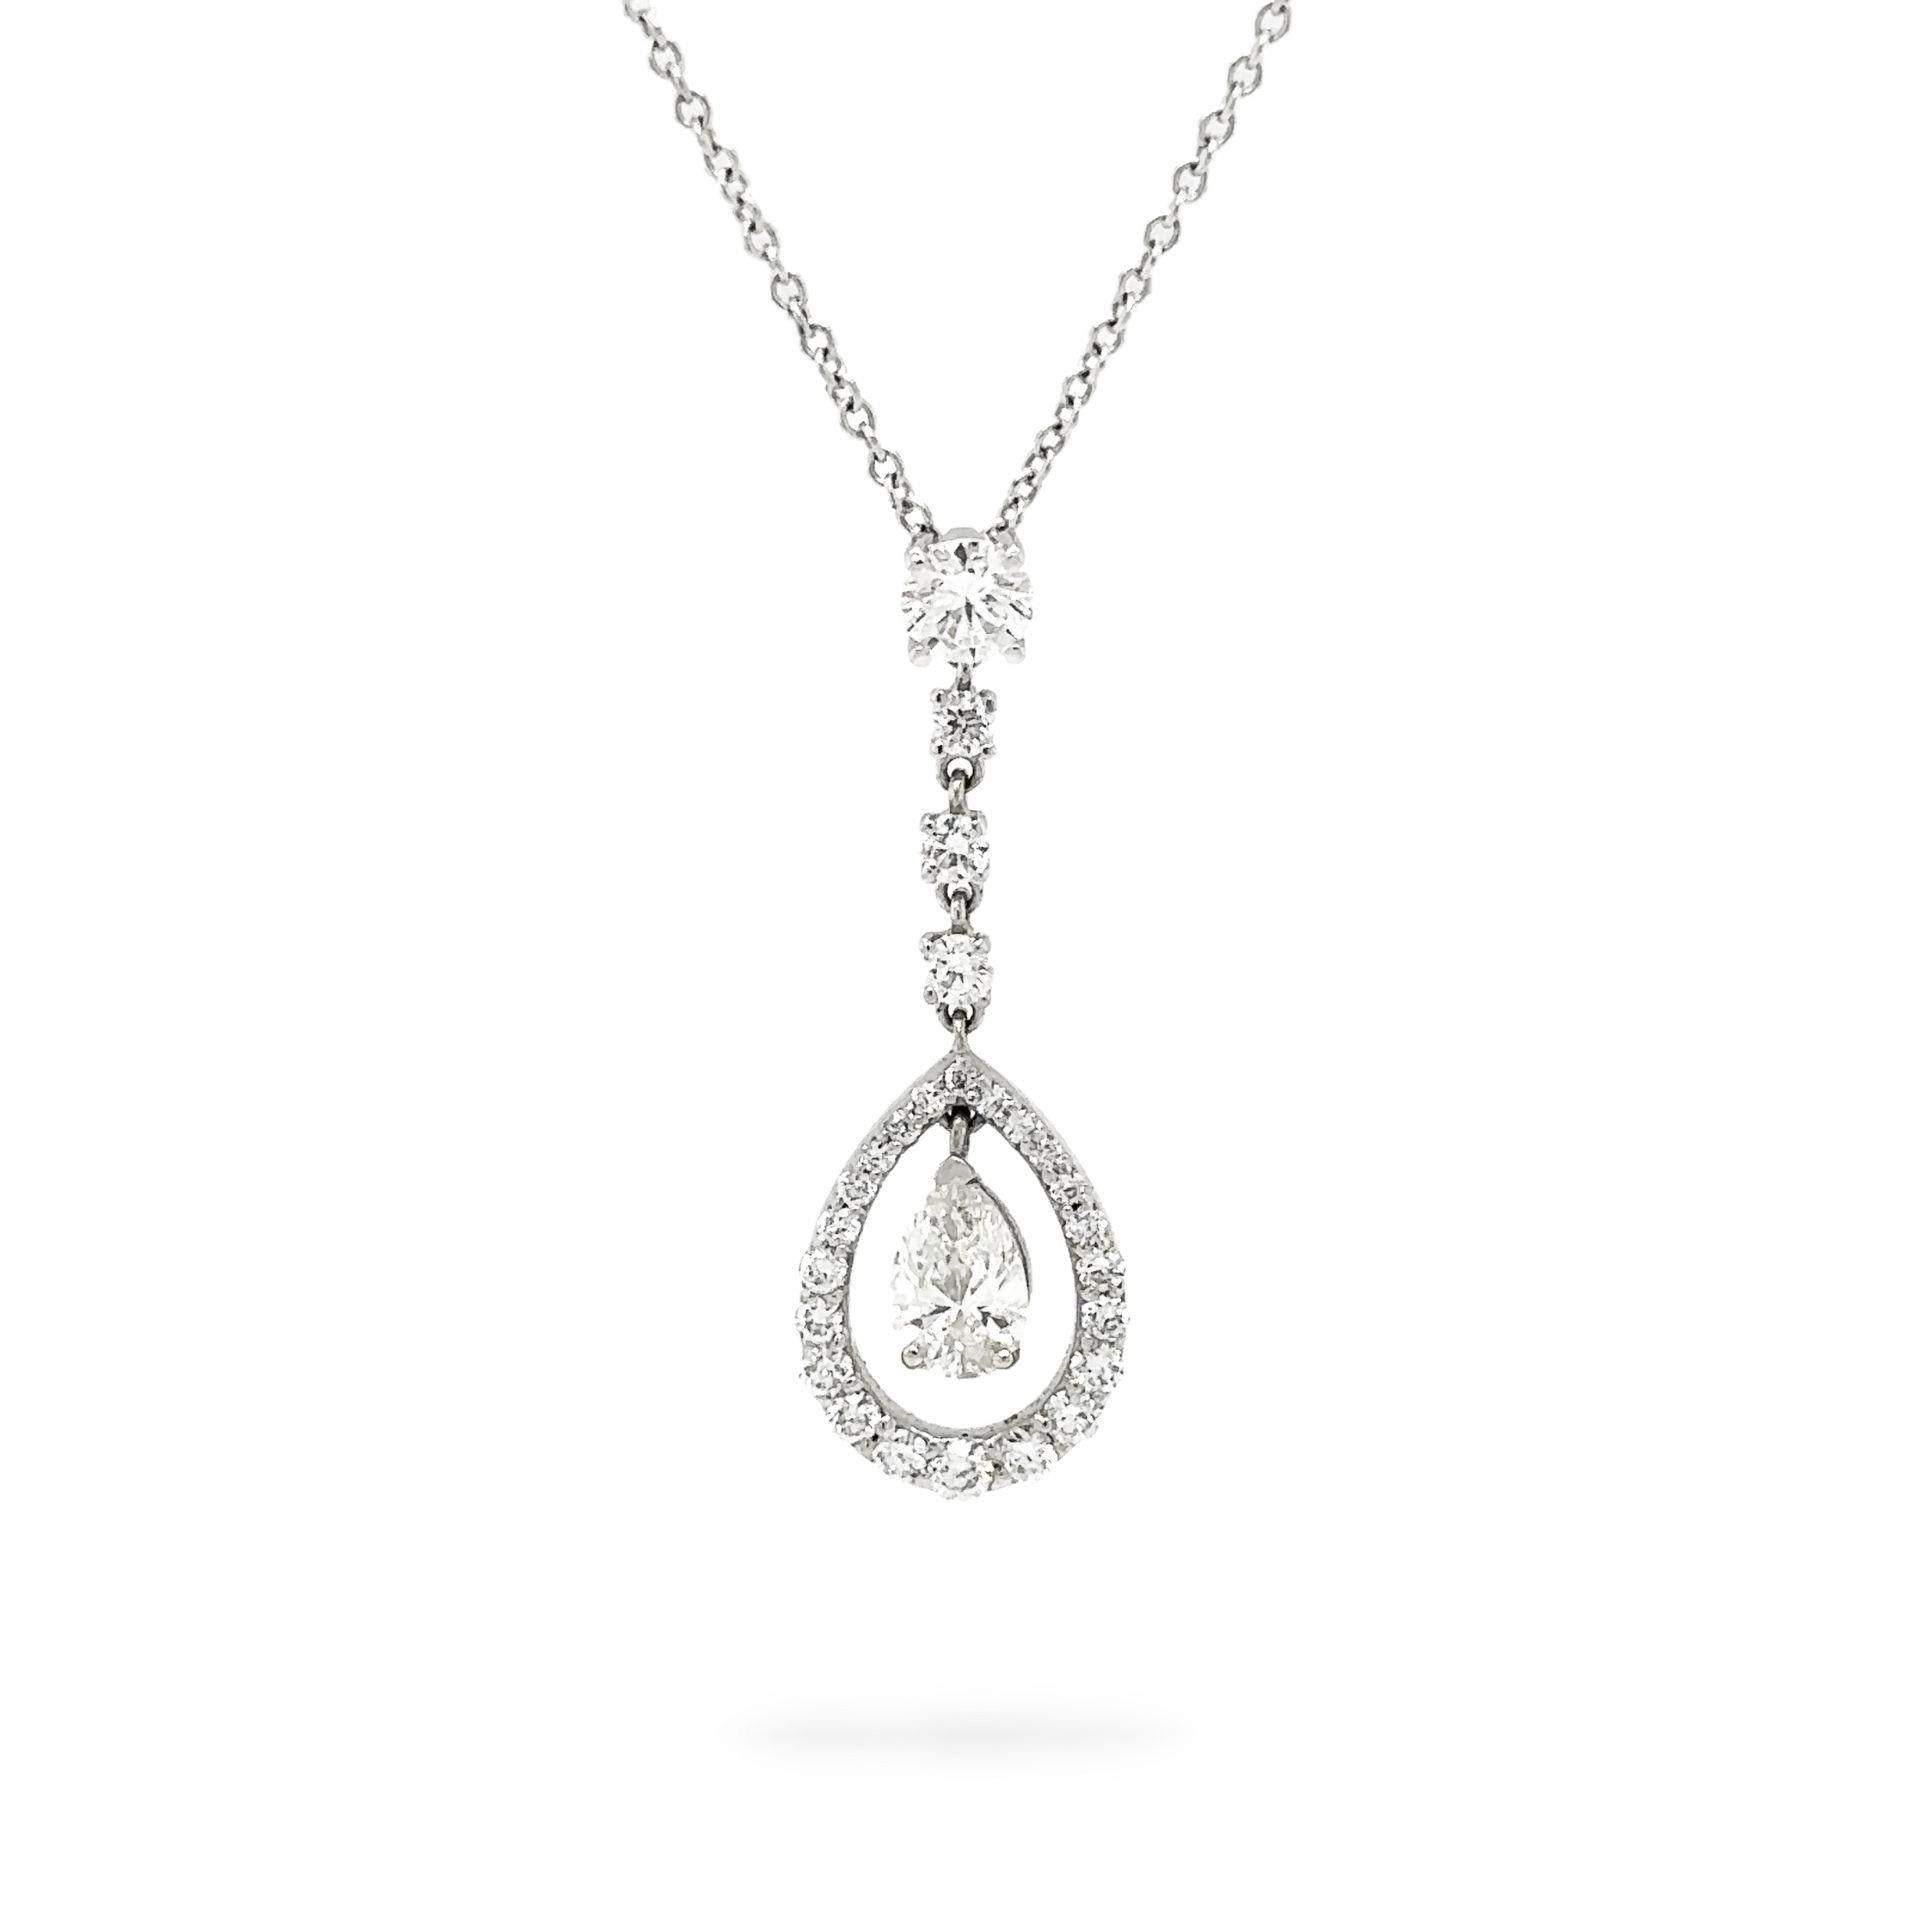 Diamond  Pear Shape and Round Necklace

Pear Shape weighs 0.38 carat J Color VS1 Clarity

with 0.55 carat Total Weight of Round Diamonds G/H Color SI Clarity

Set in 18Karat White Gold

ITEM DETAILS

    Item Number: J2917

Setting Information

   